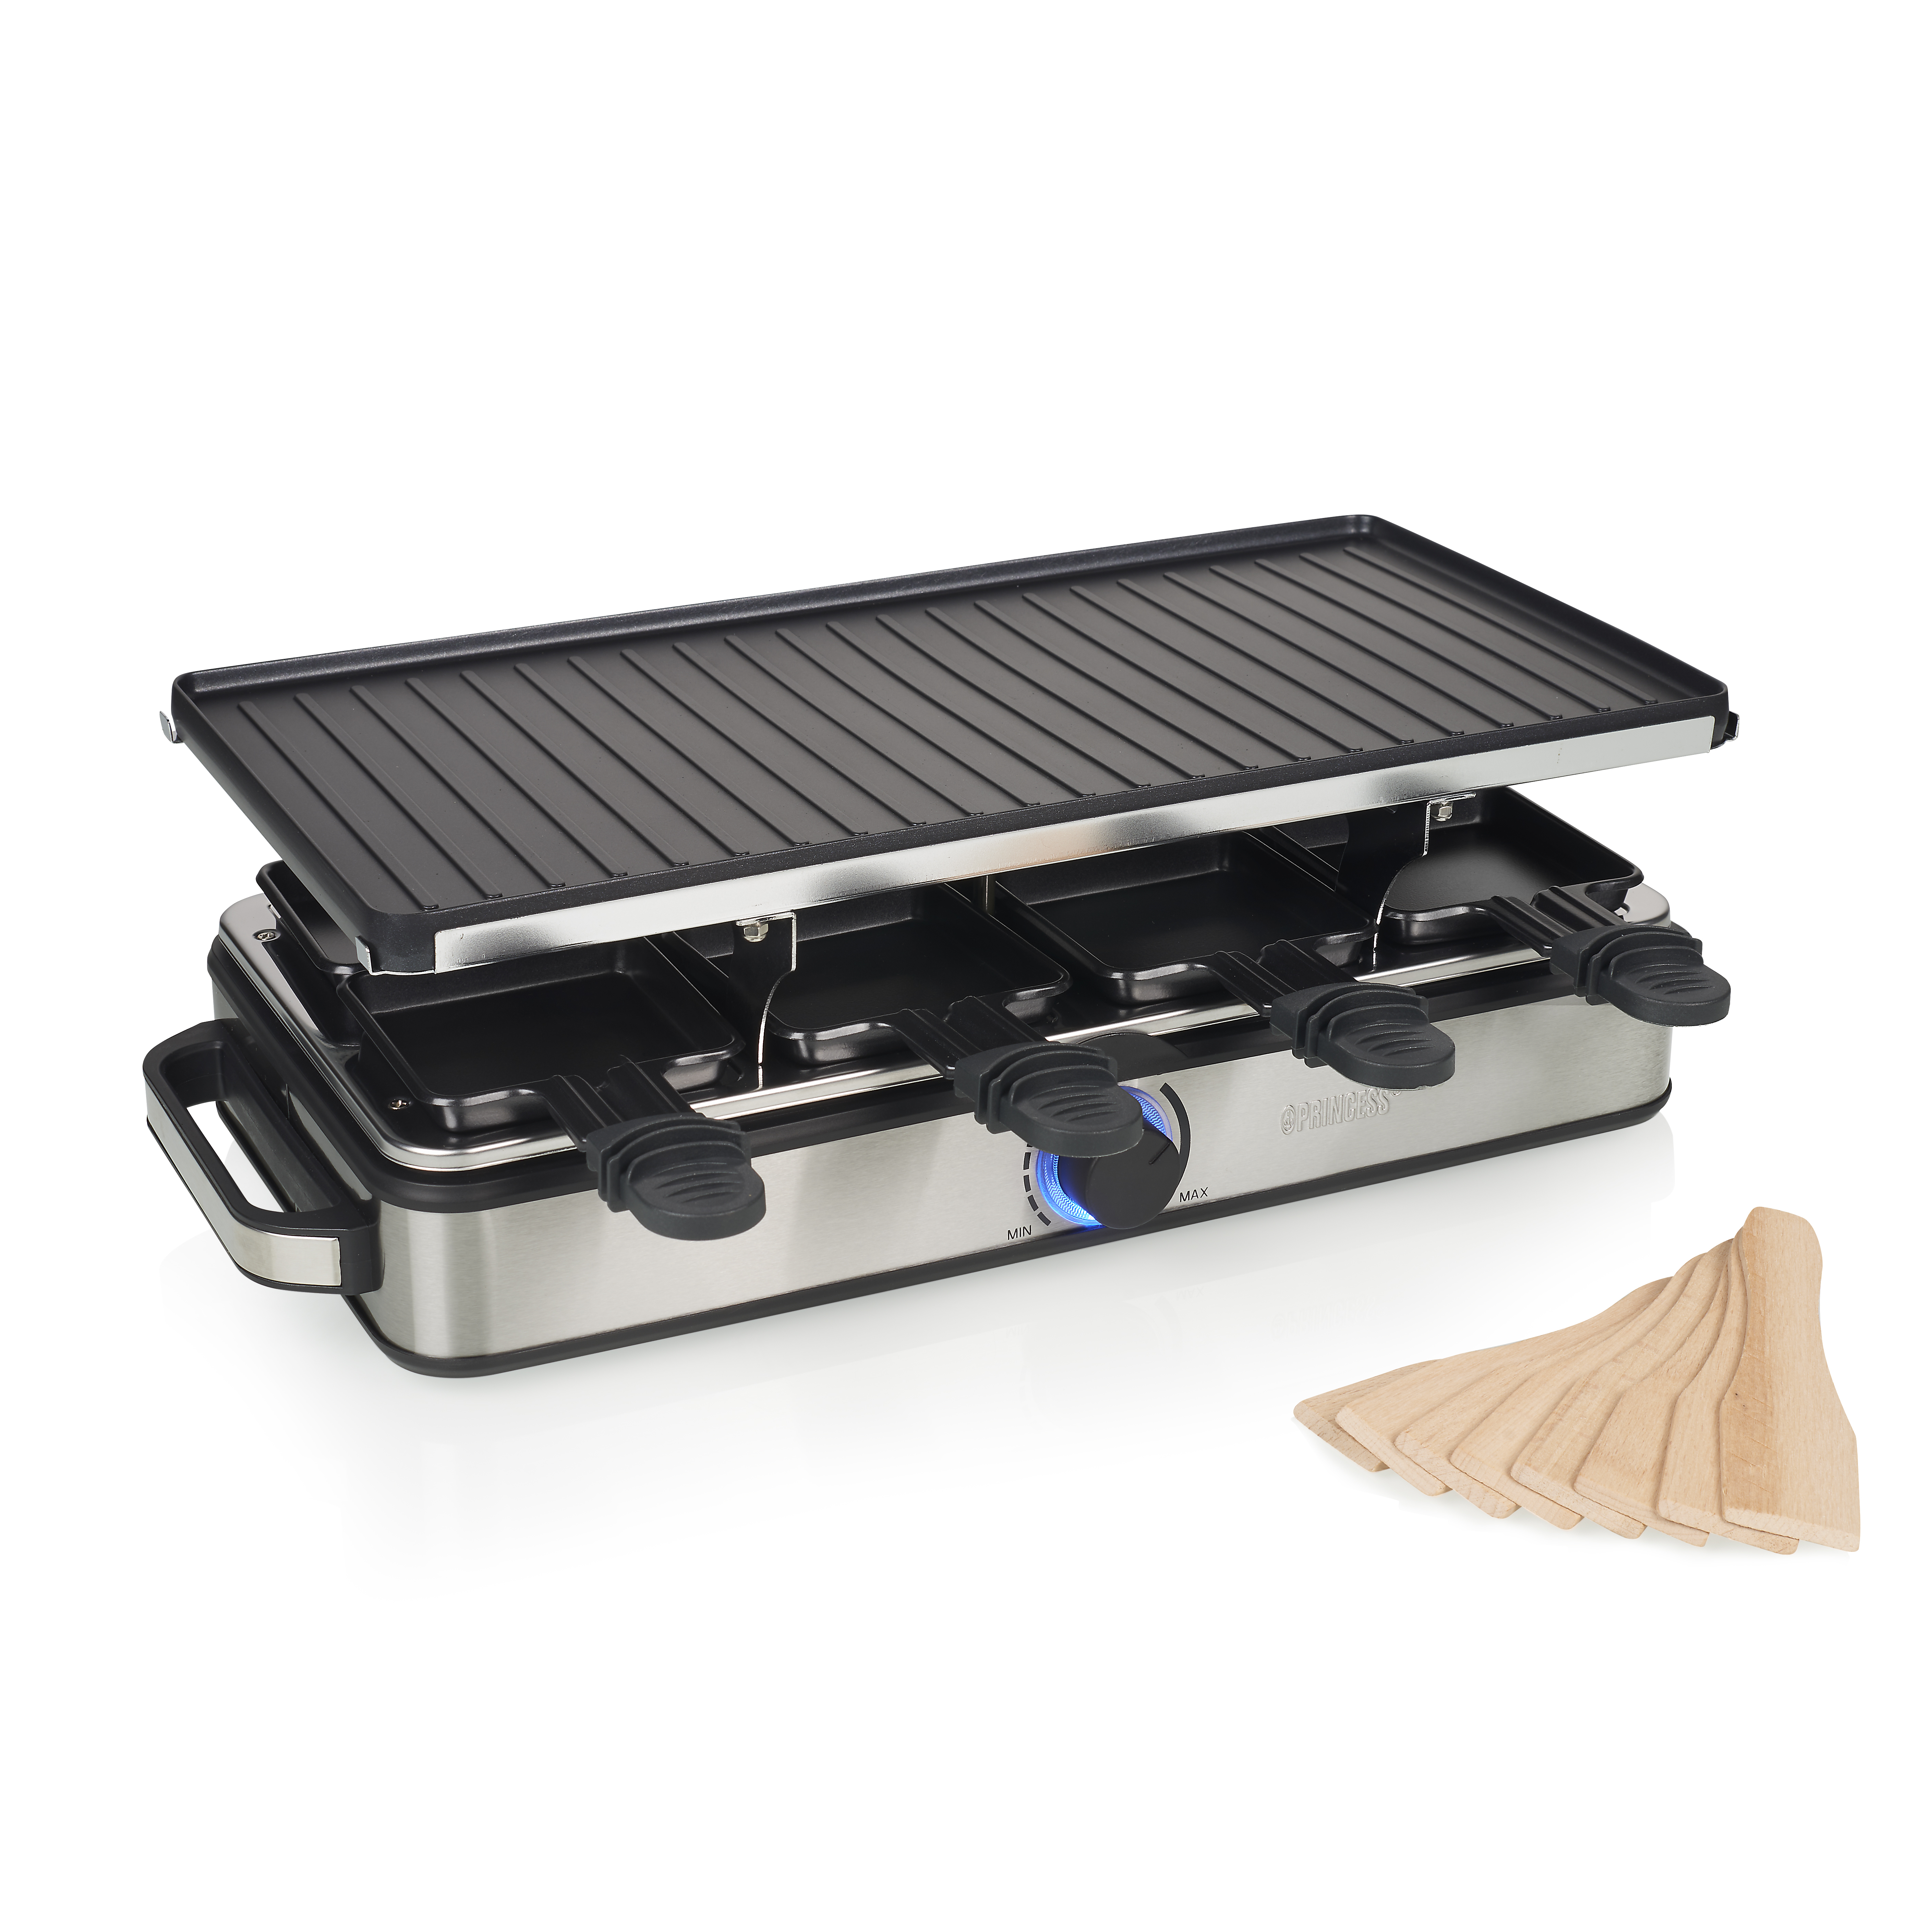 Image of Princess 162645 Raclette 8 Grill Deluxe